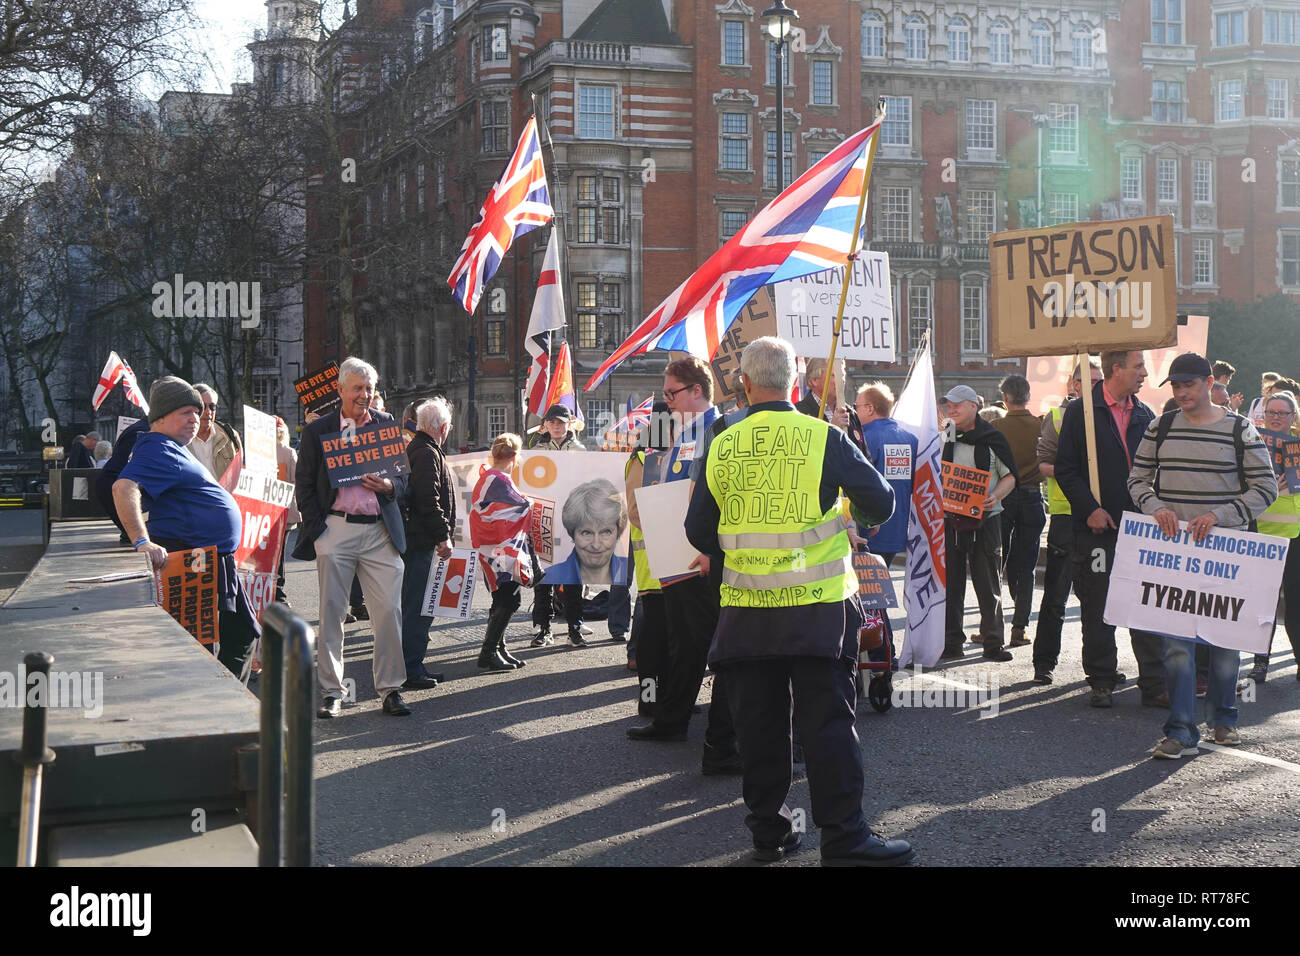 London, UK. 27th Feb, 2019. Pro-Brexit Activists demonstrate in Westminster, London. Credit: Thomas Krych/Alamy Live News Stock Photo